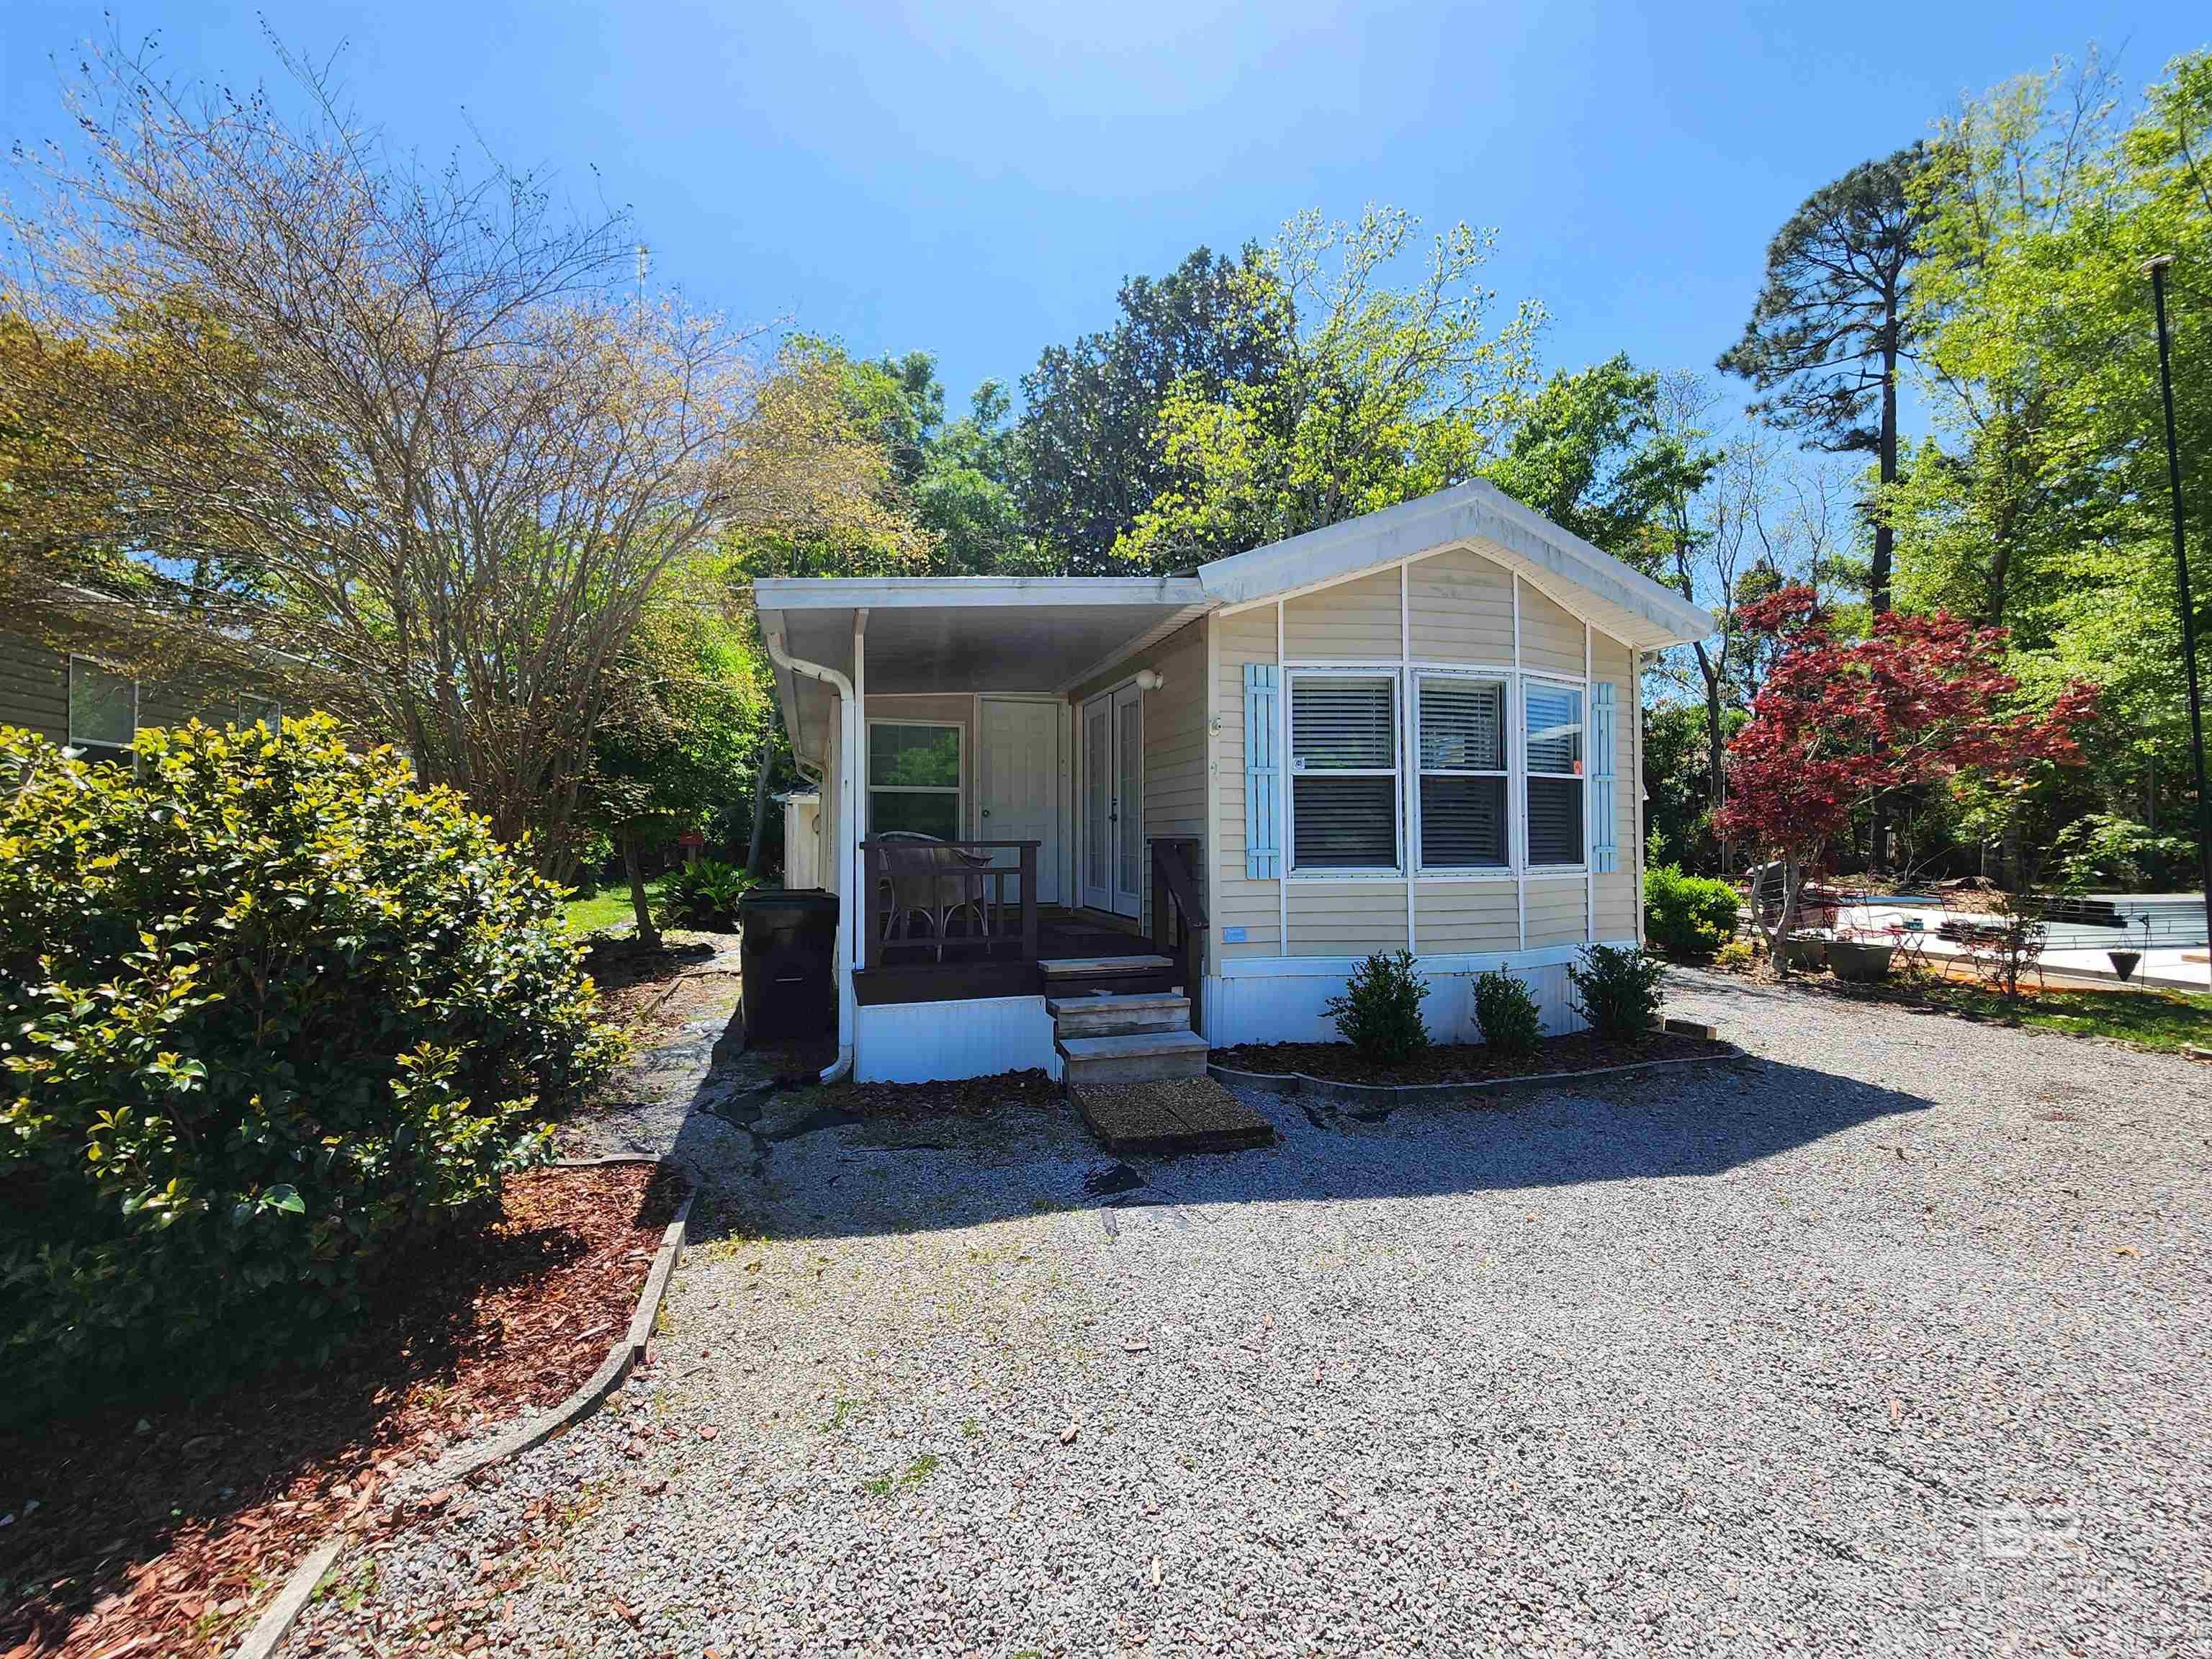 This charming 2 bedroom, 1 bathroom park model is in the sought after Spanish Cove Community located in Lillian, AL. The lot size is 40' x 82.1 feet. The Park model had an addition added that includes the 2nd bedroom and a bonus living/rec room. The addition also has a back door and a front door access. The main living area and the bonus room both have access to the covered front porch. There is an 8x14 outbuilding that houses extra storage and the washer and dryer hookups. The Spanish Cove Community has so much to offer. There is 24 hour security, an outdoor pool (That is covered and heated in the winter months for year-round use.), a beautiful pier that looks over Perdido Bay, barbaque area, private beach area, a club house, basketball courts, tennis courts, shuffle board, fitness center, laundry, etc. Check out this property and the Spanish Cove Community. Lillian Alabama is rural, but in close proximity to Alabama and Florida's white sand beaches. There is a public boat lauch just down the road for all you boating needs. Call me or your favorite realtor today to schedule a showing. Buyer and Buyers agents are responsible for any verification information/inspections/square footage, etc that is pertinant to the sale of the property. All information is believed to be true and accurate as stated in the listing. The property will be sold "AS-IS, WHERE-IS".